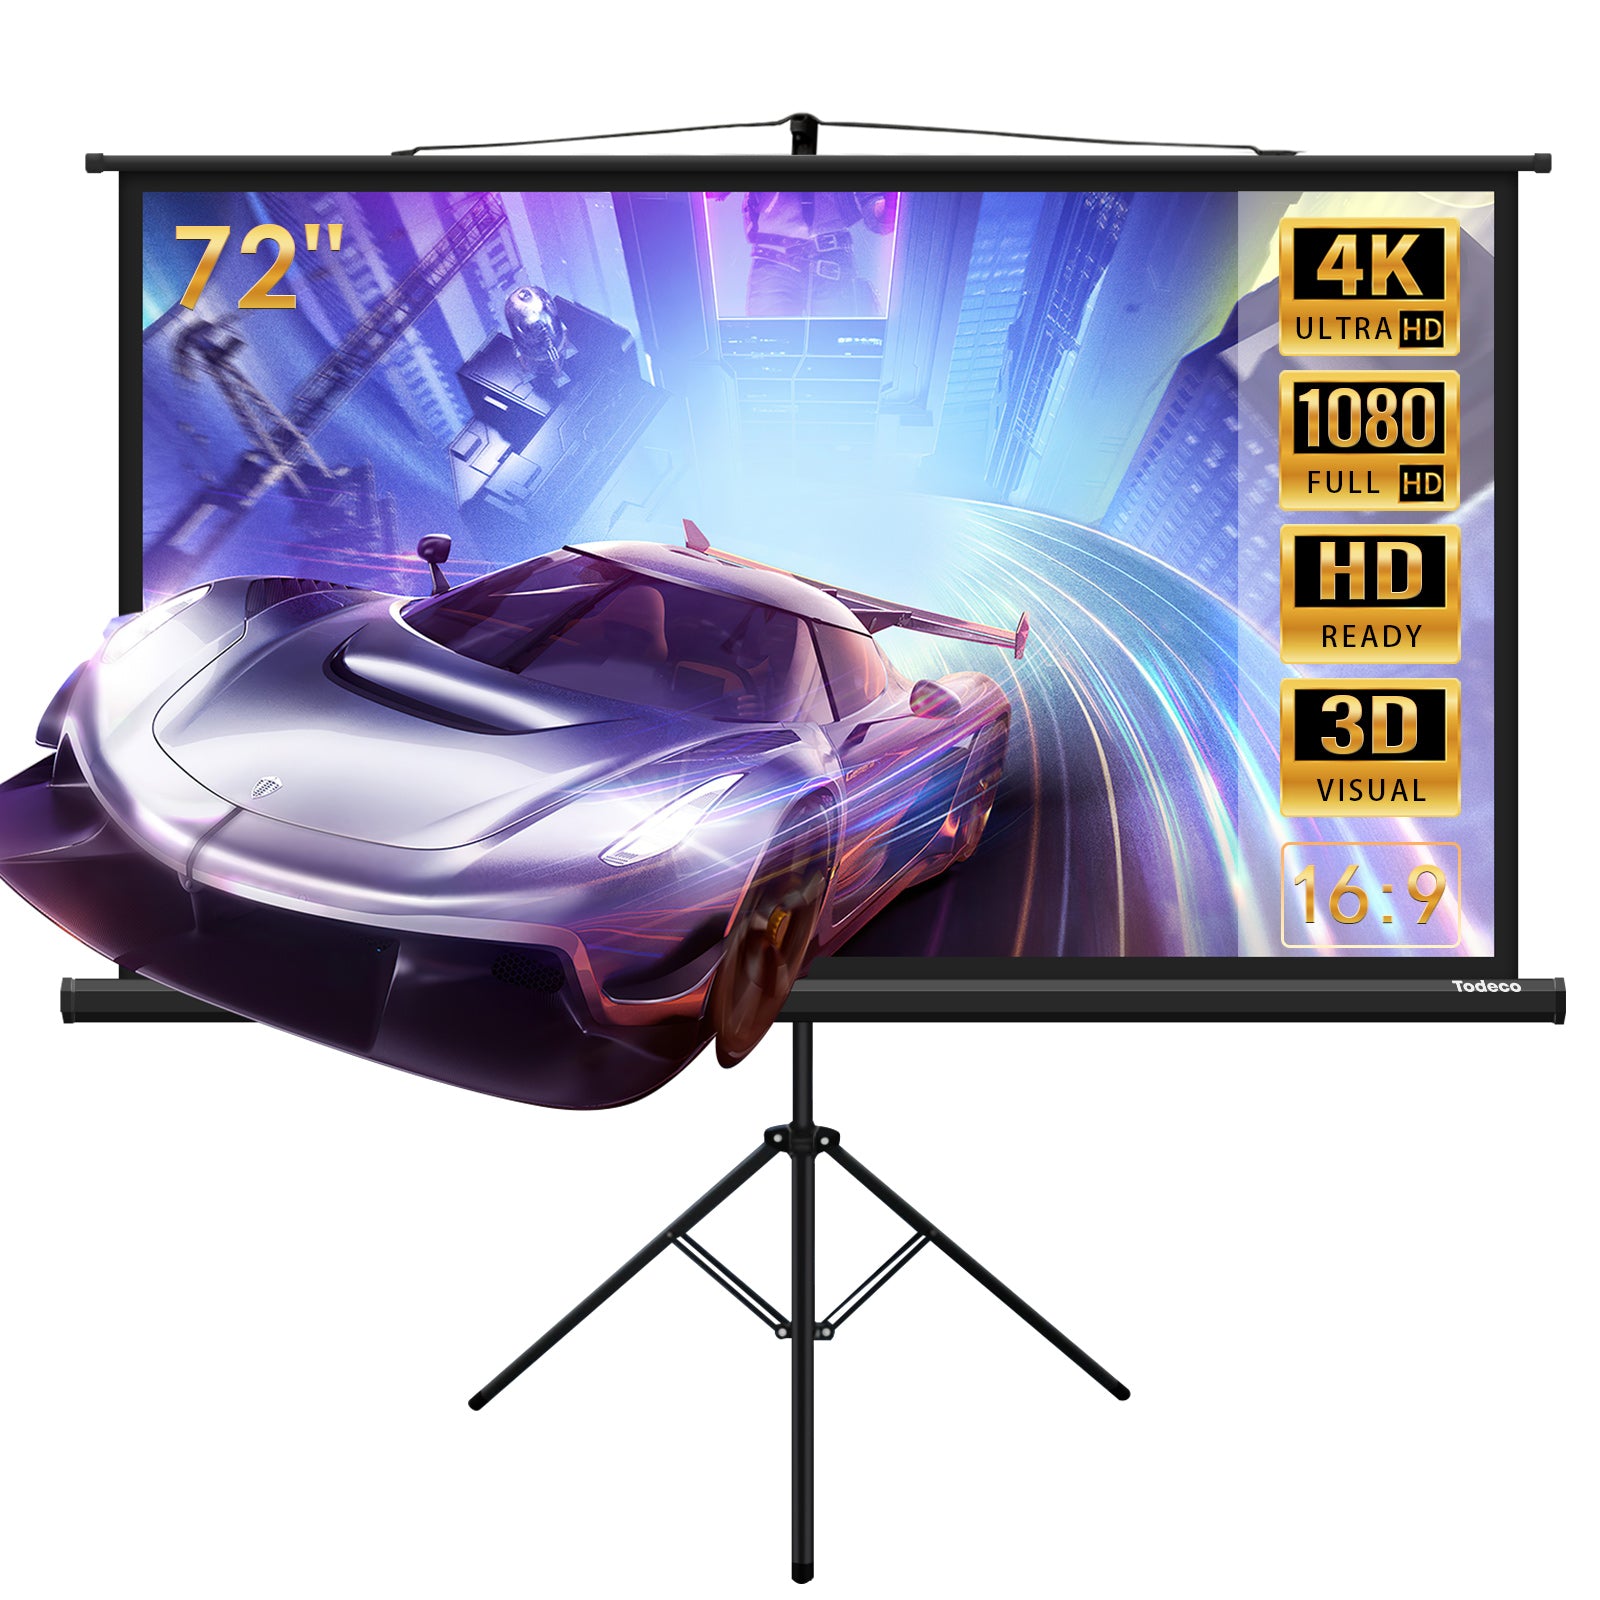 72-Inch-Floor-Standing-Projection-Screen-Foldable-Portable-Projector-Screen-with-Tripod-for-Indoor-or-Outdoor-Use-160-x-90-cm-16-9-Formats-HD-4K-3D-Black-72-Inch-Floor-Standing-Projection-Screen-Black